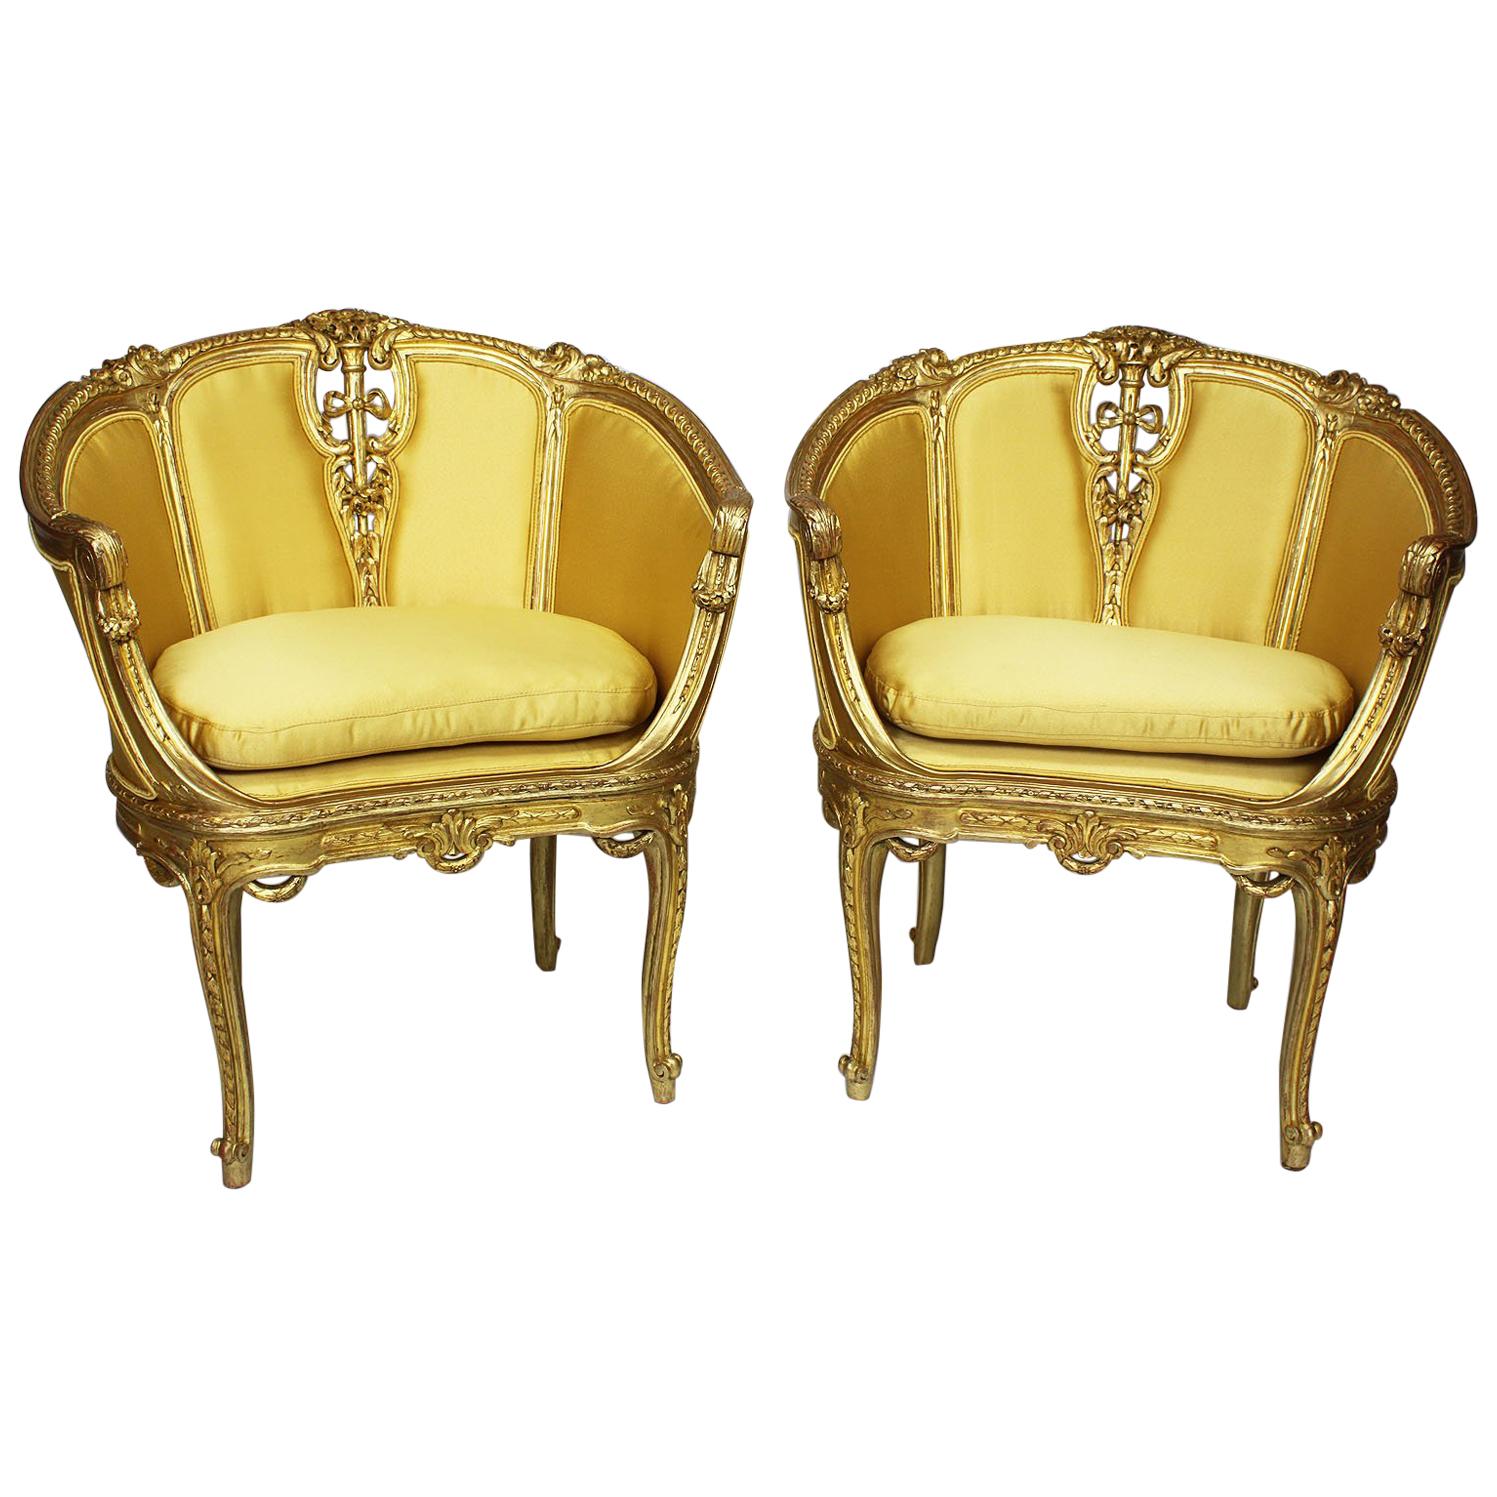 Pair of French Belle Époque Louis XV Style GiltWood Carved Bergère Armchairs For Sale